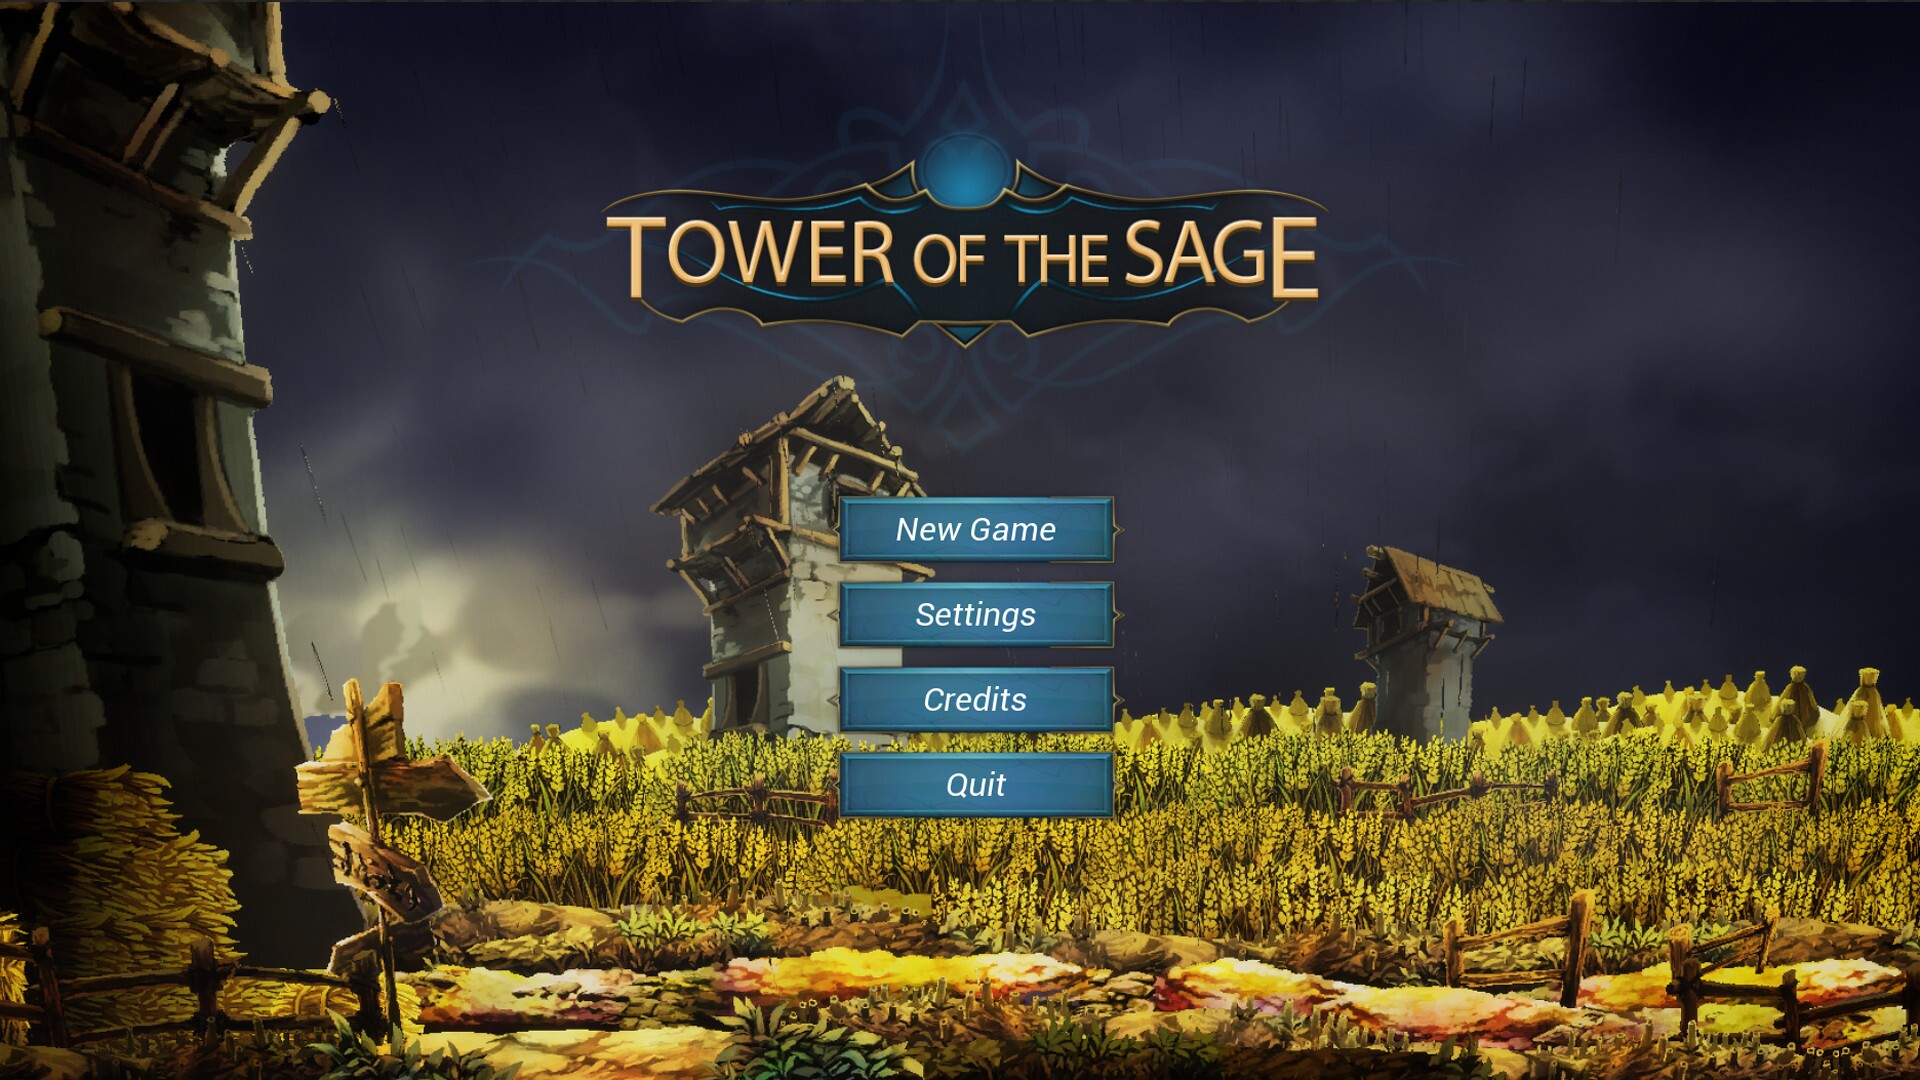 The tower game